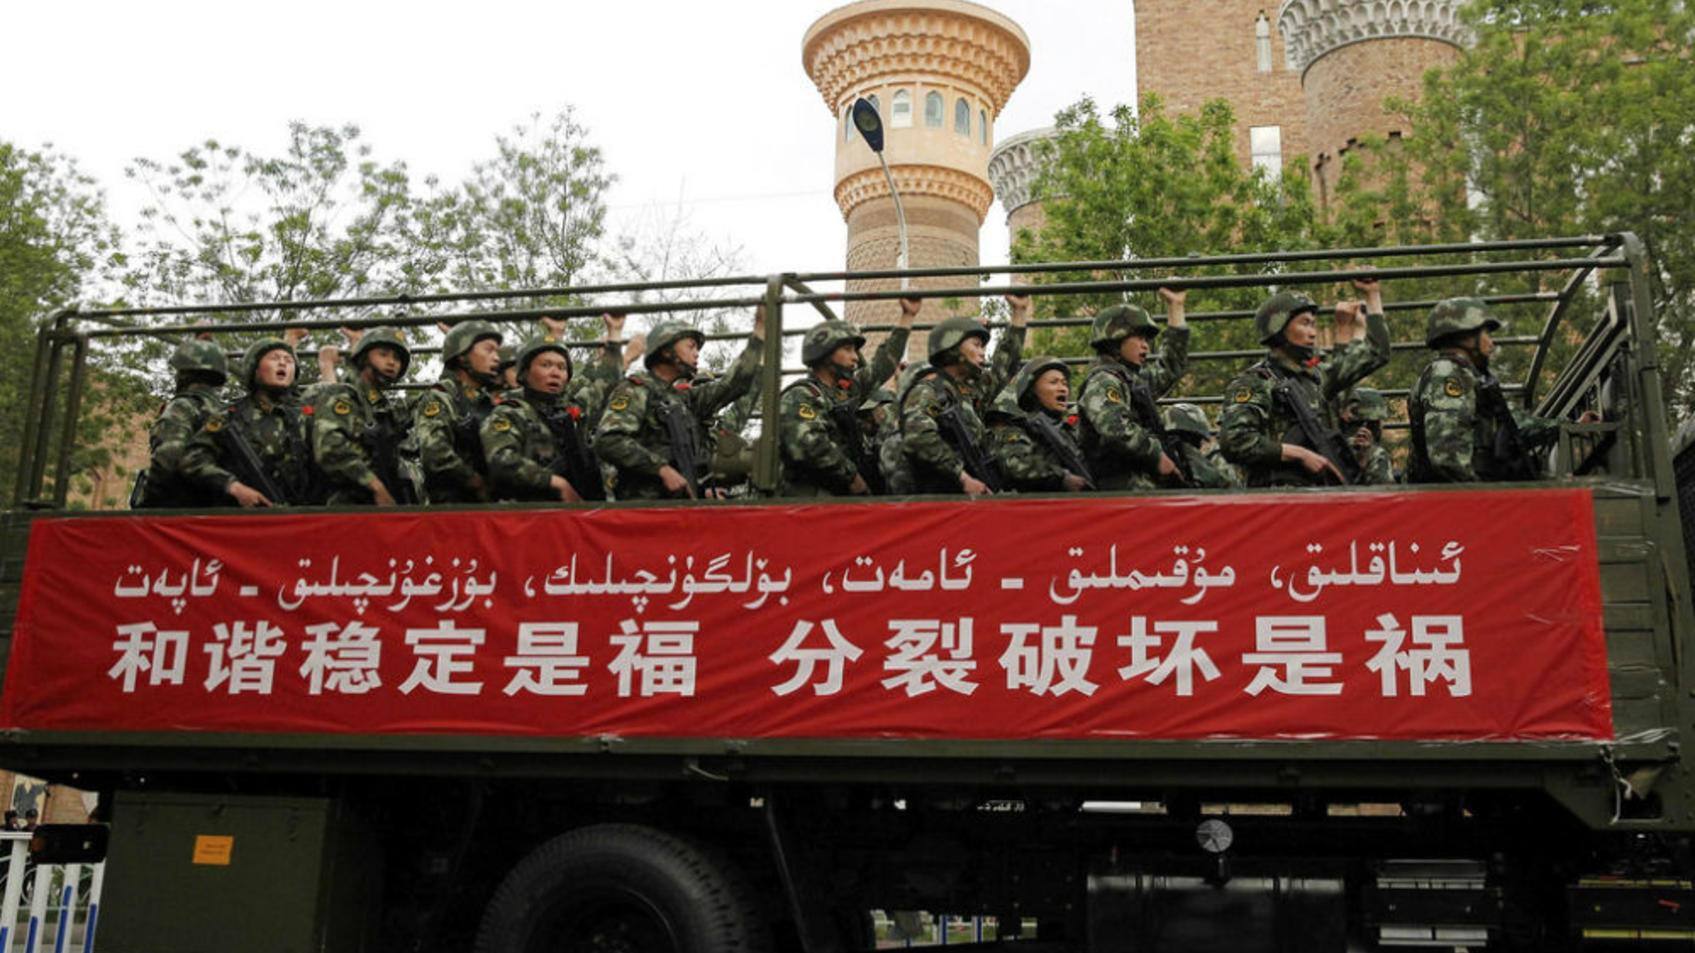 Terror-Anschlag in Chinas Provinz Xinjiang